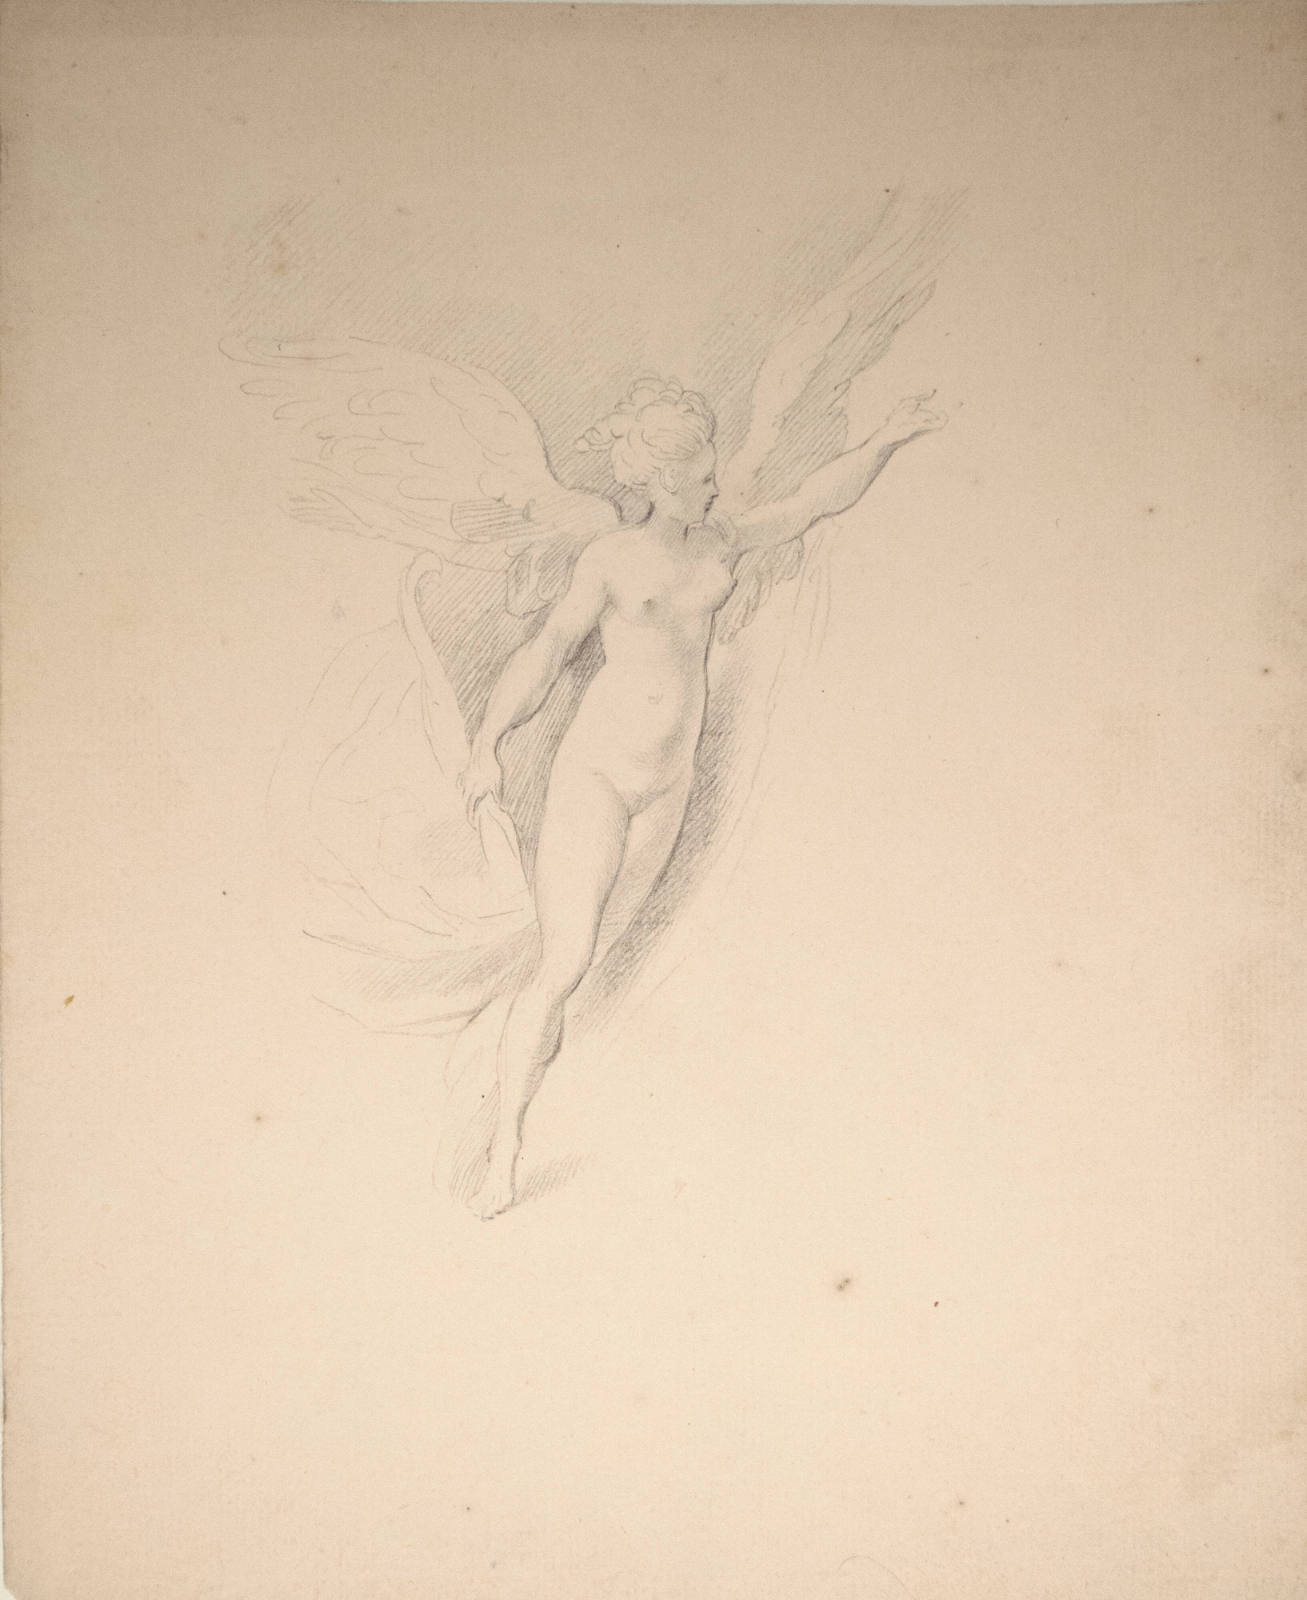 Allegorical Winged Female Figure (Running Figure with Billowing Drapery)